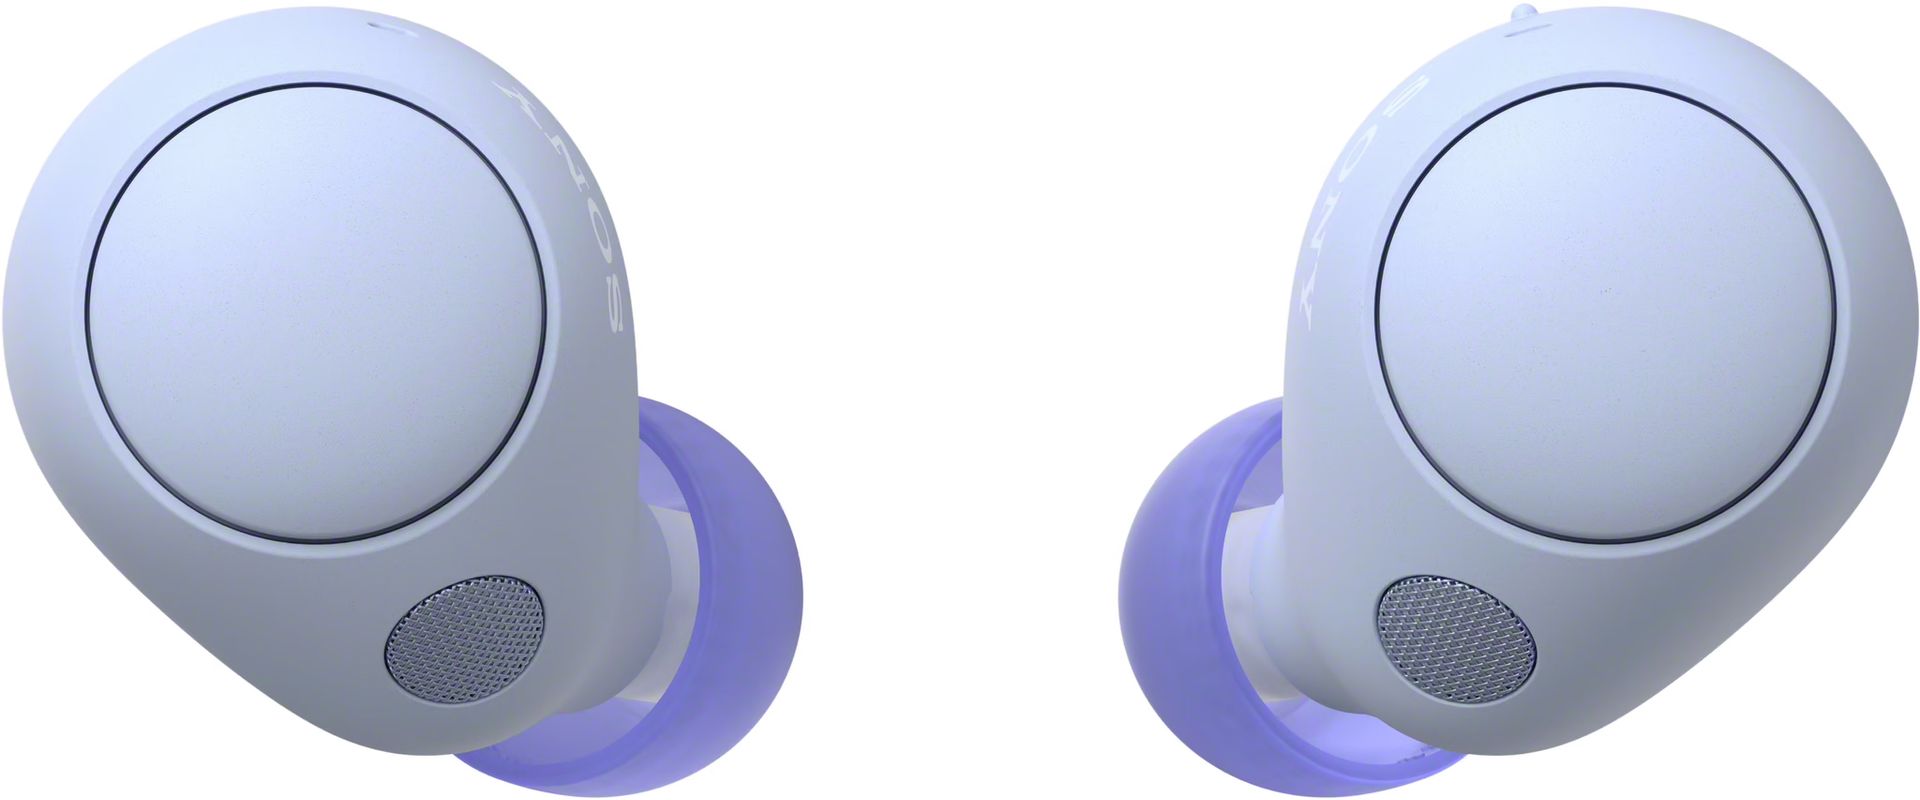 A pair of purple and white ear buds on a white background.